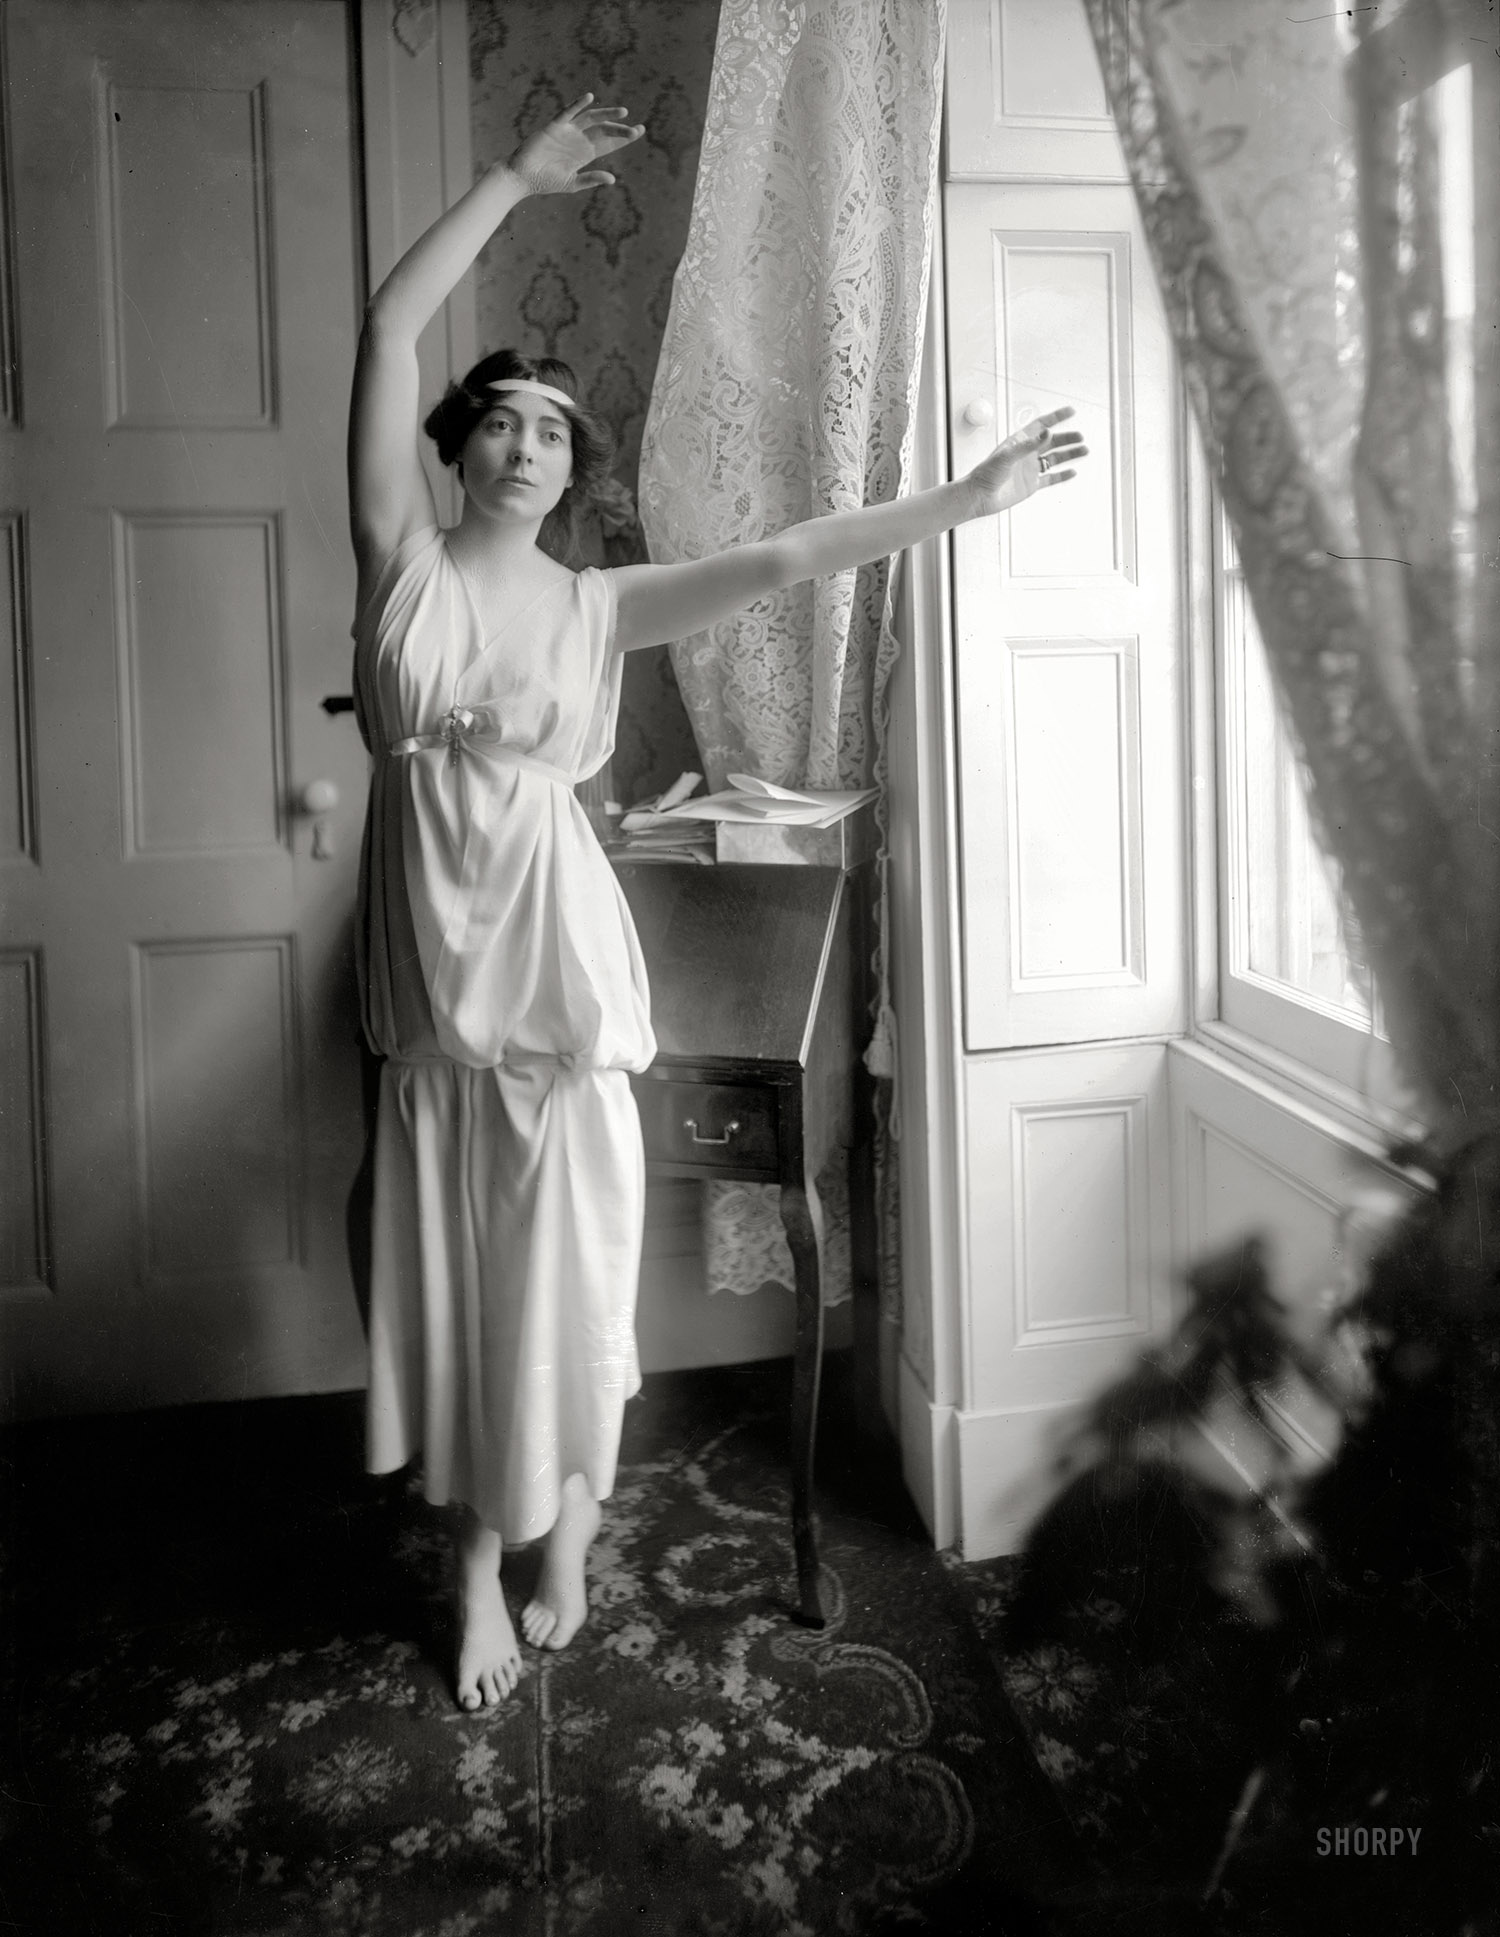 New York circa 1909. "Lady Richardson." The British dancer and writer Constance Stewart-Richardson (1883–1932), author of "Dancing, Beauty and Games." 8x10 glass negative, George Grantham Bain Collection. View full size.